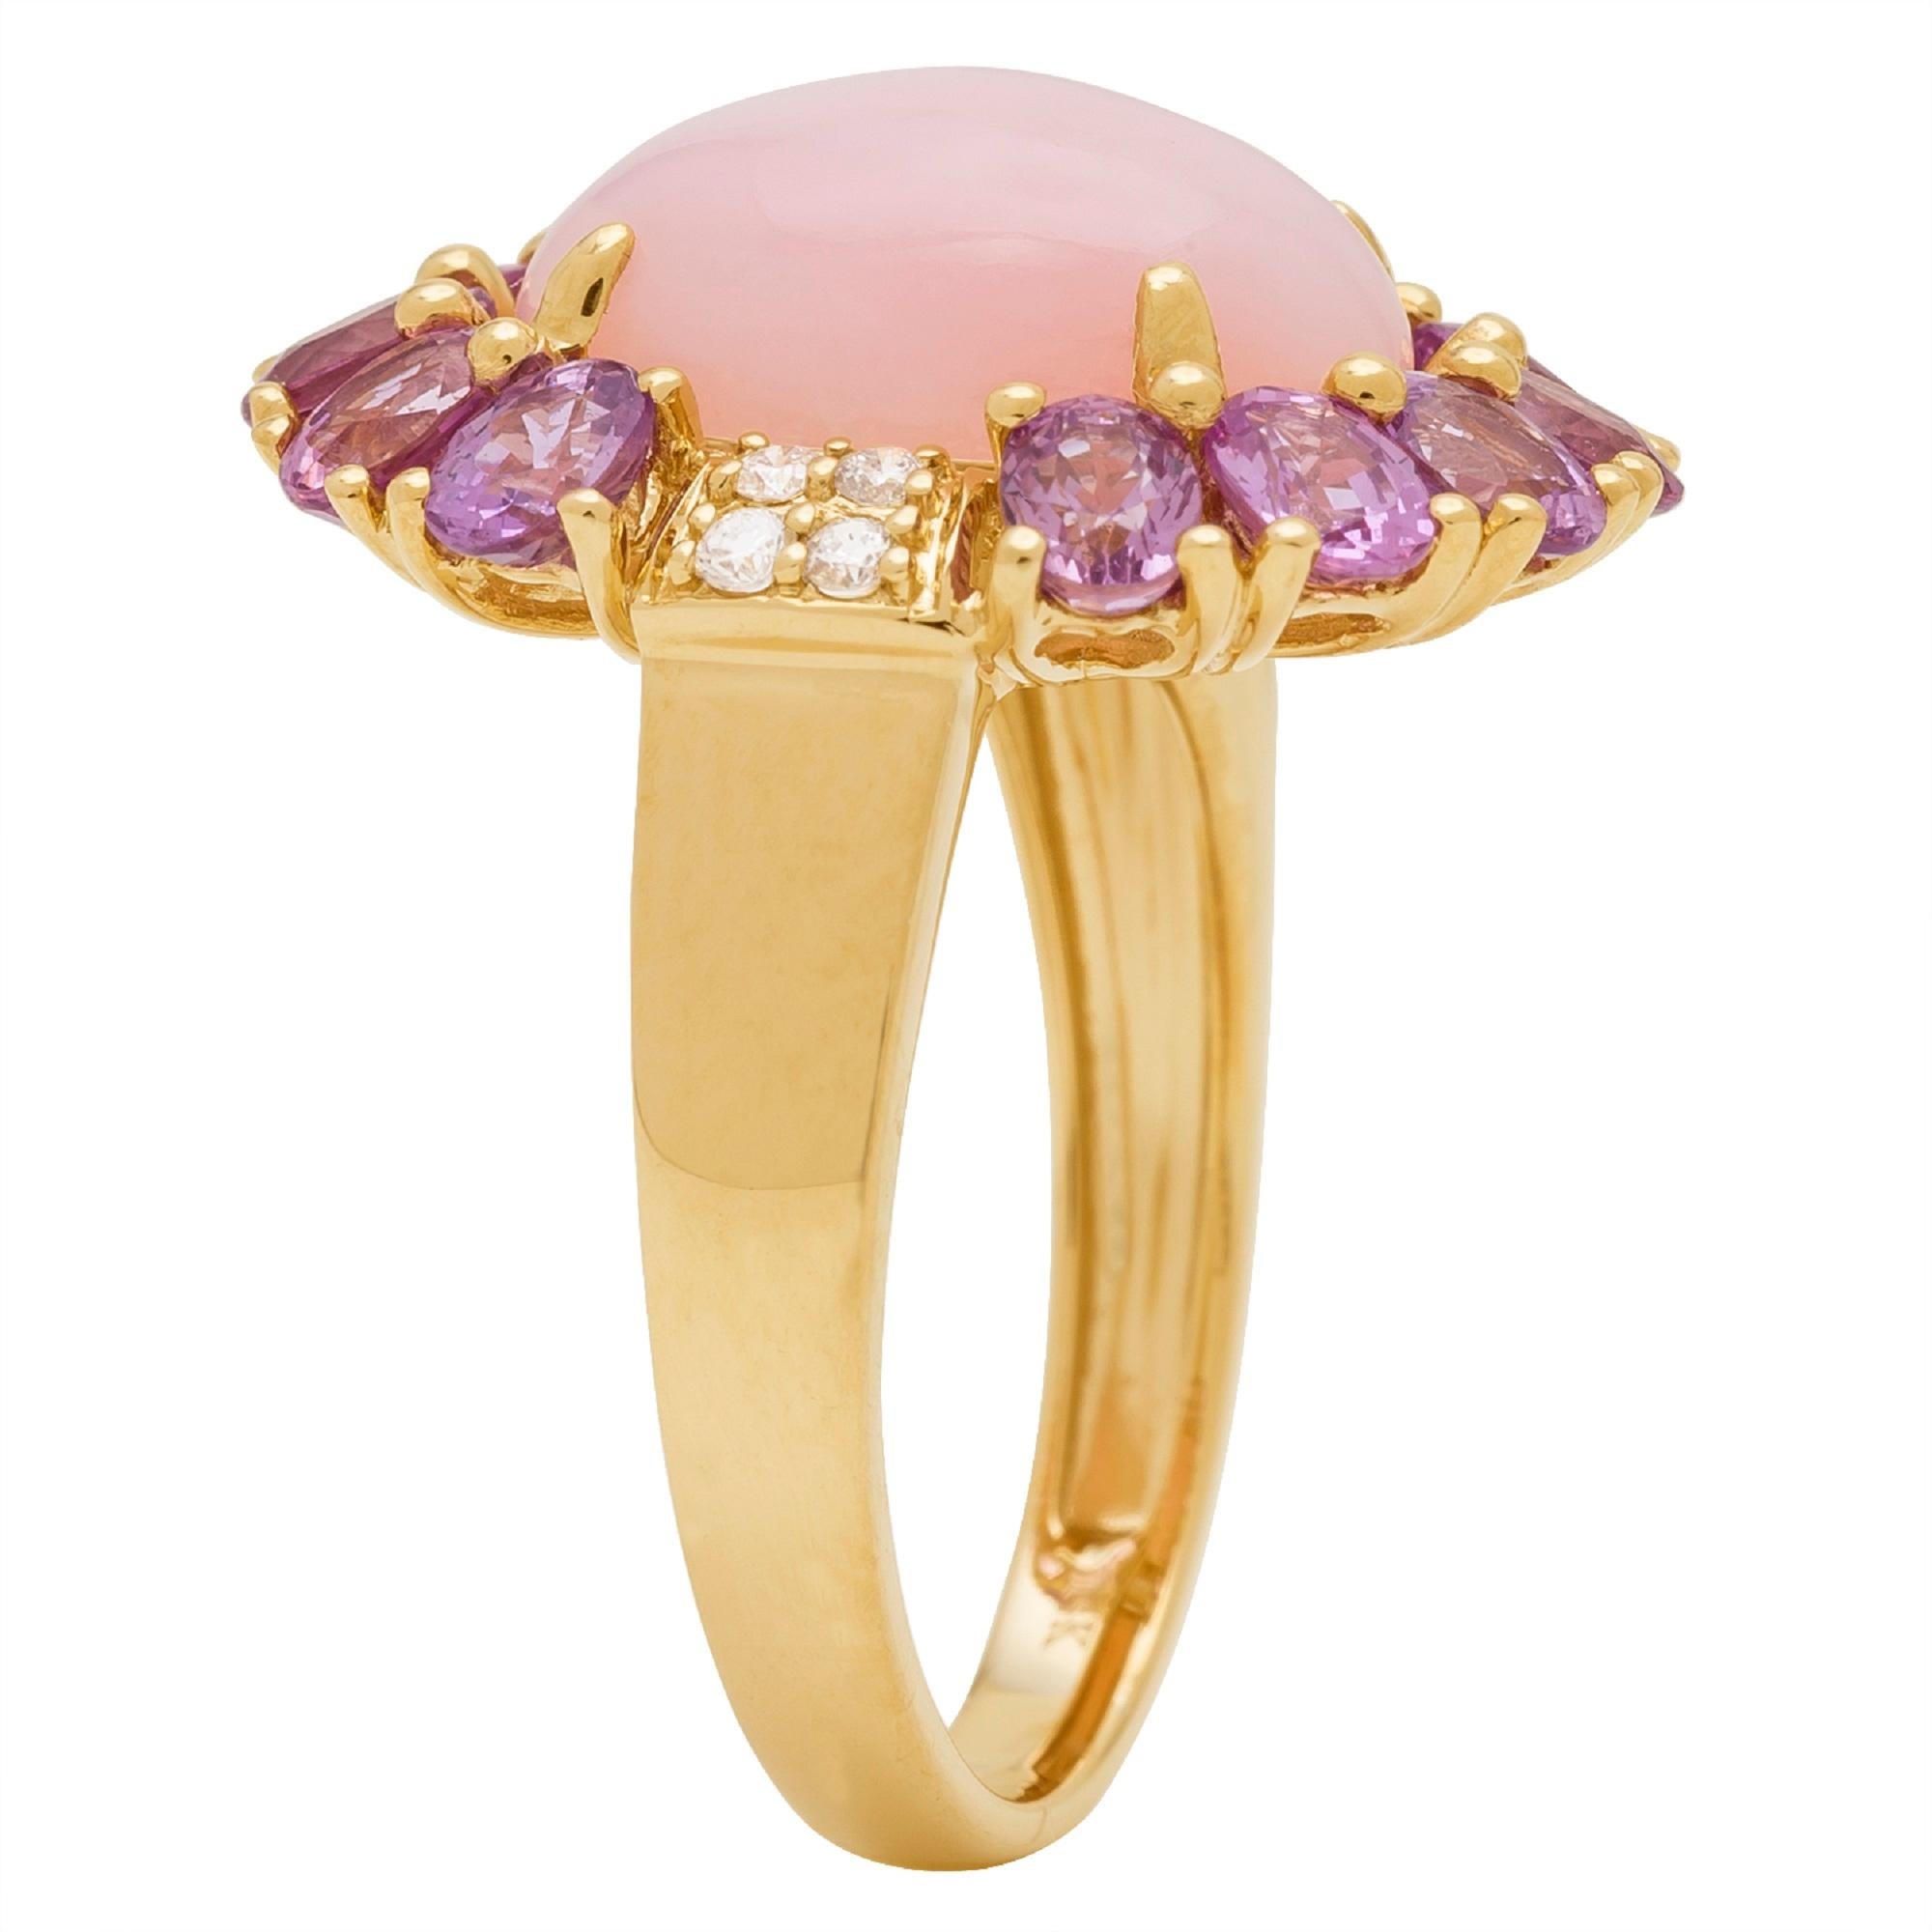 Decorate yourself in elegance with this Ring is crafted from 14-karat Yellow Gold by Gin & Grace. This Ring is made up of 10x14 mm Oval-Cab (1 pcs) 5.41 carat Pink Opal, 3x4 Oval-cut (13 pcs) 3.13 carat Pink Sapphire and Round-cut White Diamond (8